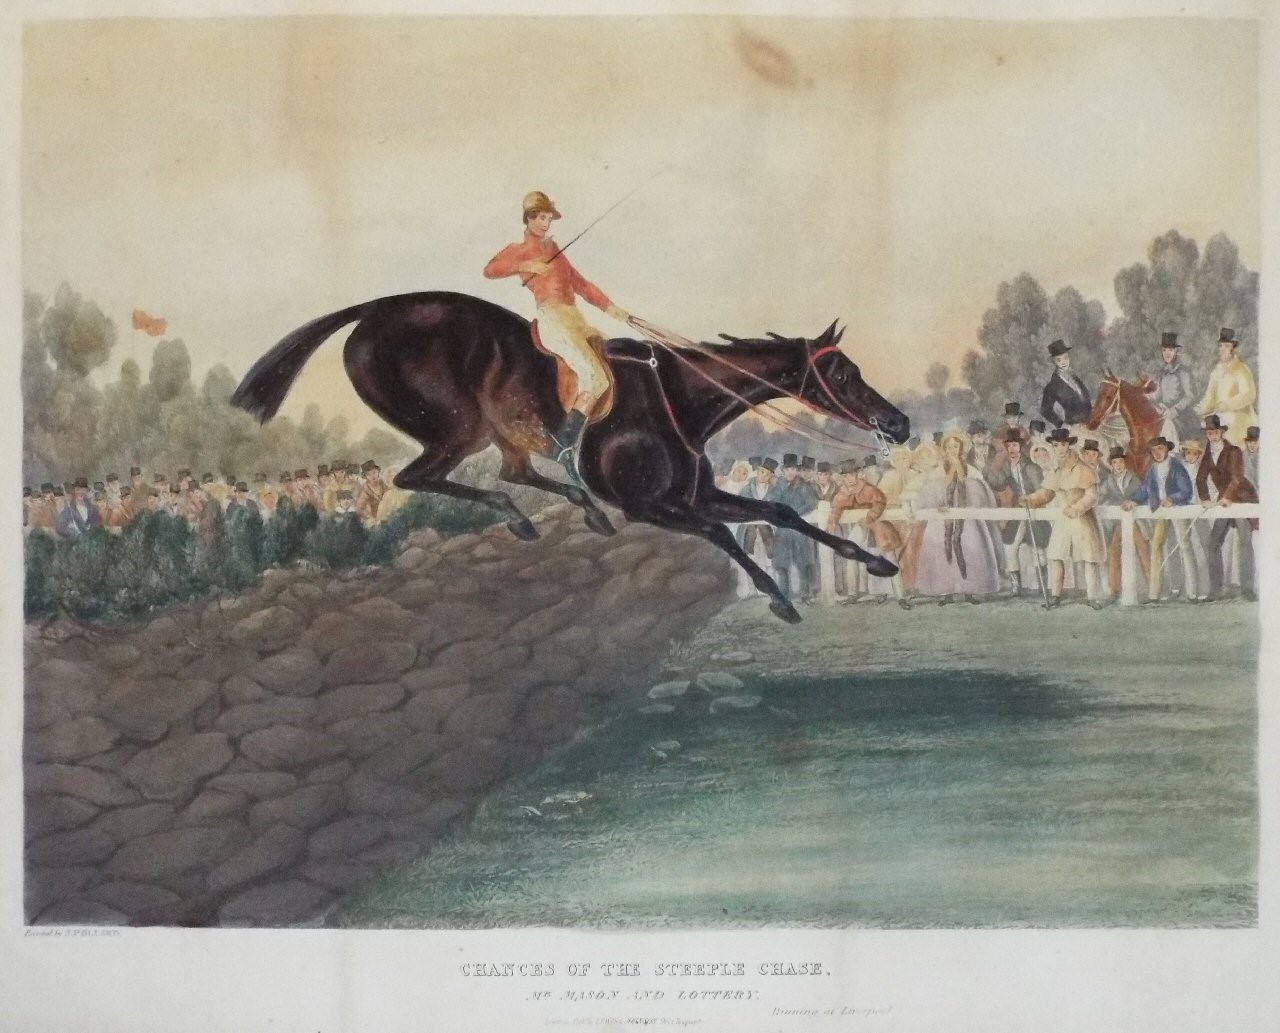 Aquatint - Chances of the Steeple Chase. 7. Mr. Mason and Lottery, Winning at Liverpool.